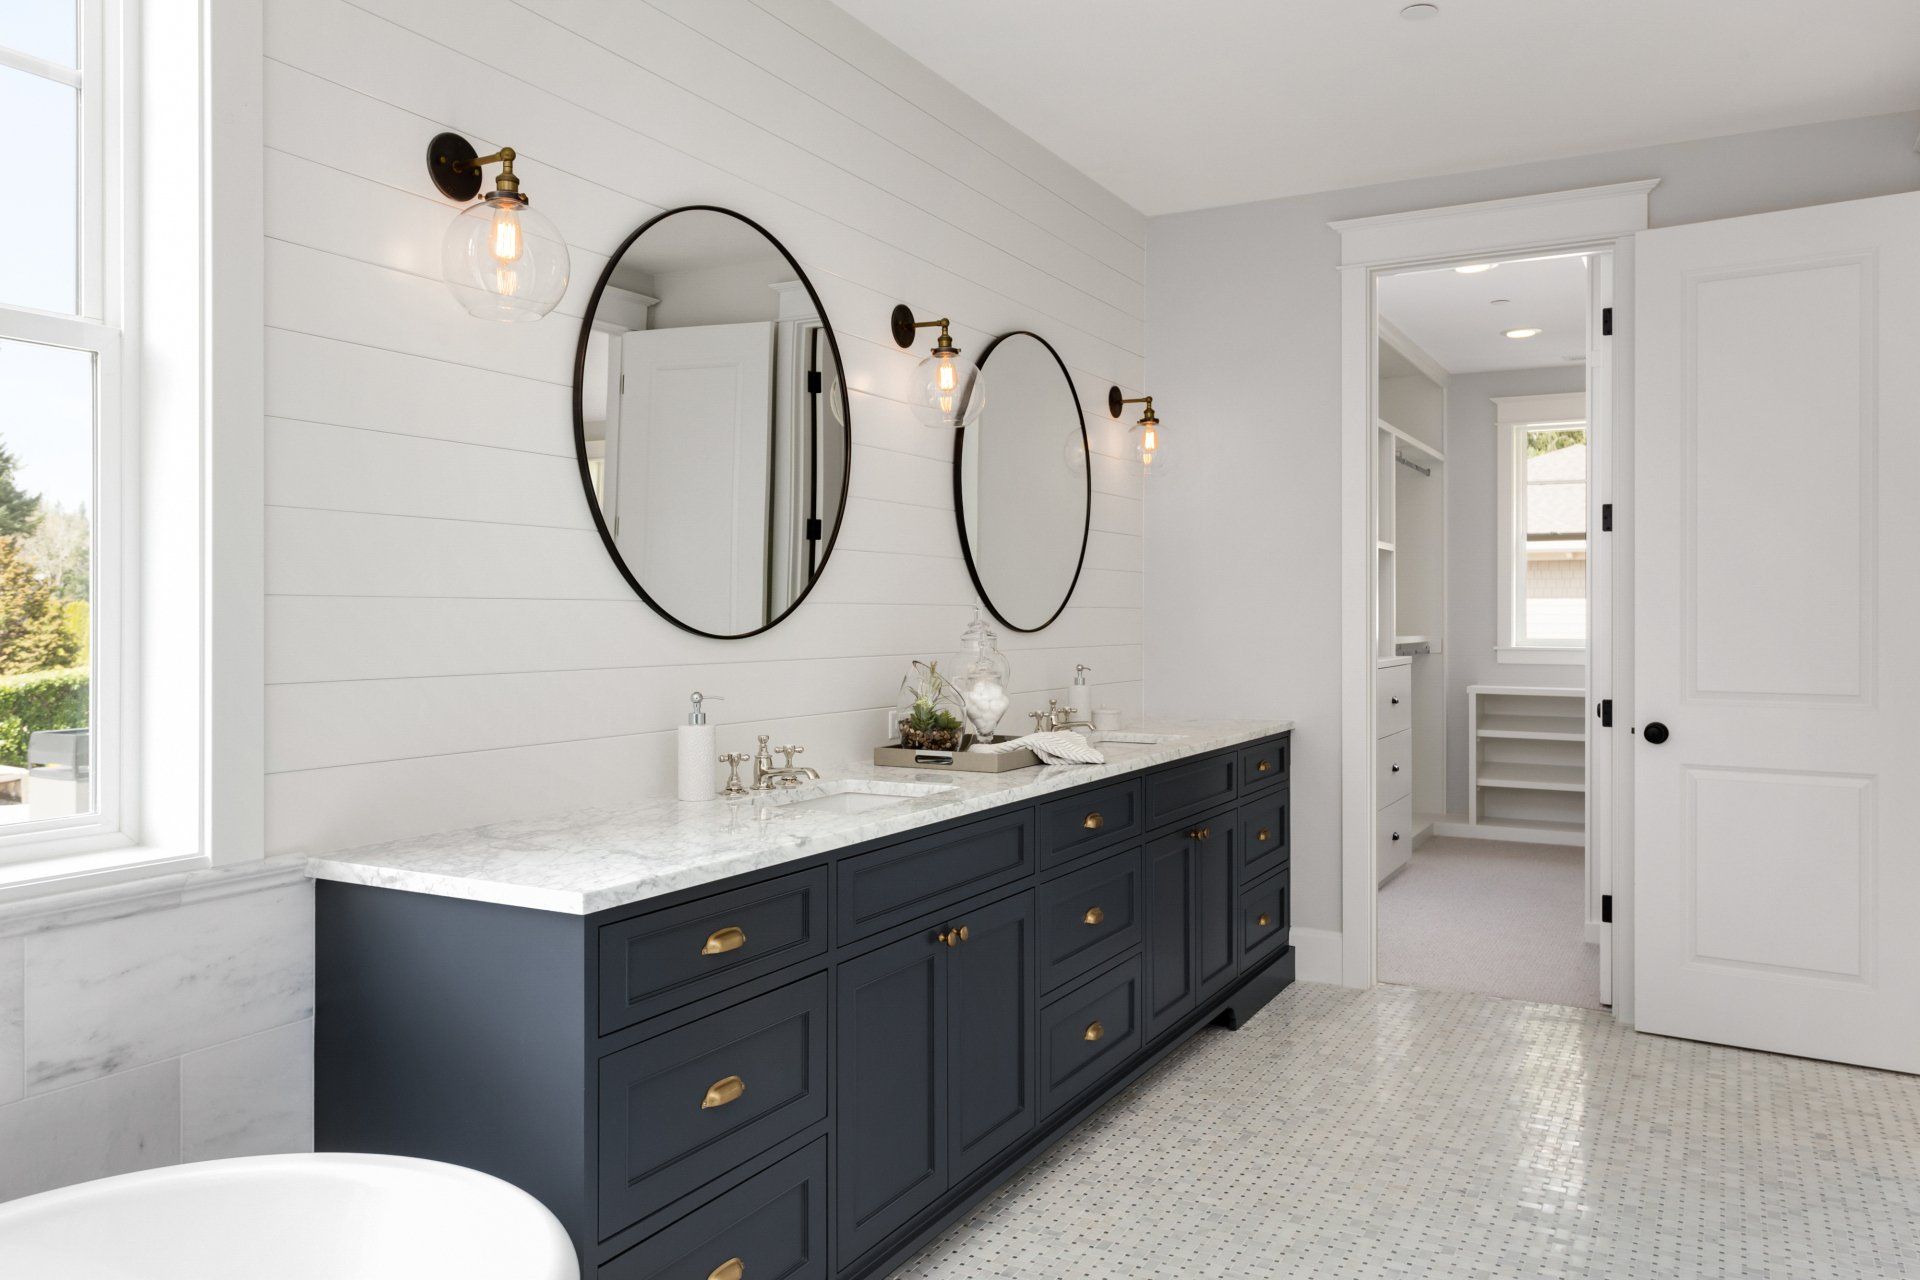 Bathroom remodeled by a modern touch